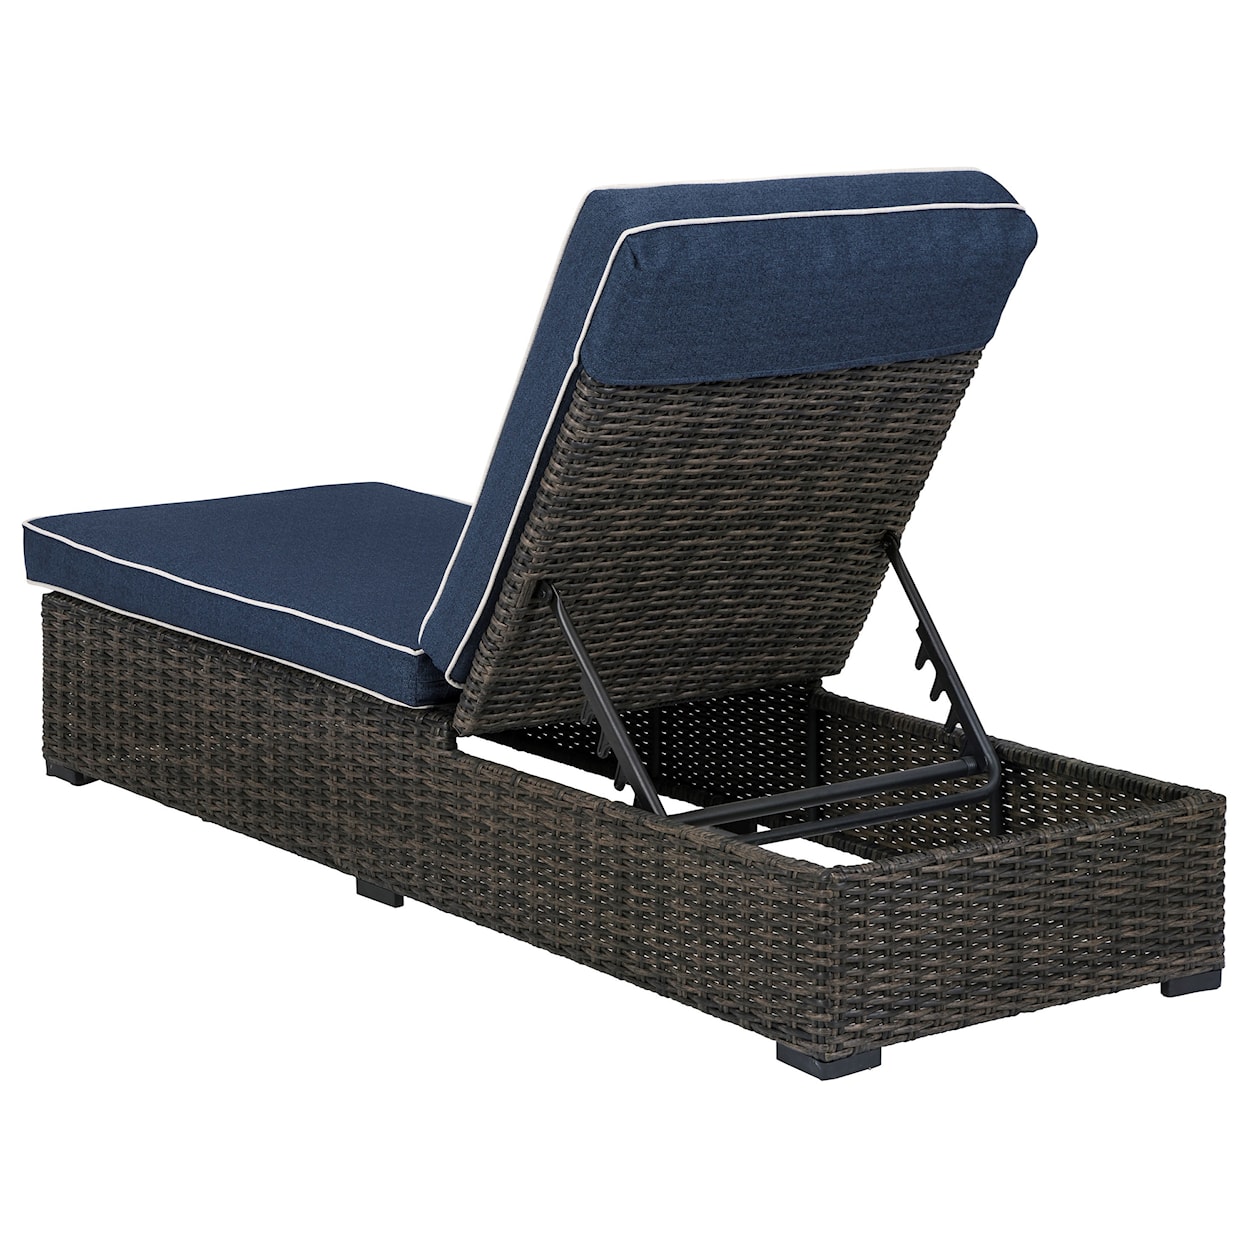 Benchcraft Grasson Lane Chaise Lounge with Cushion